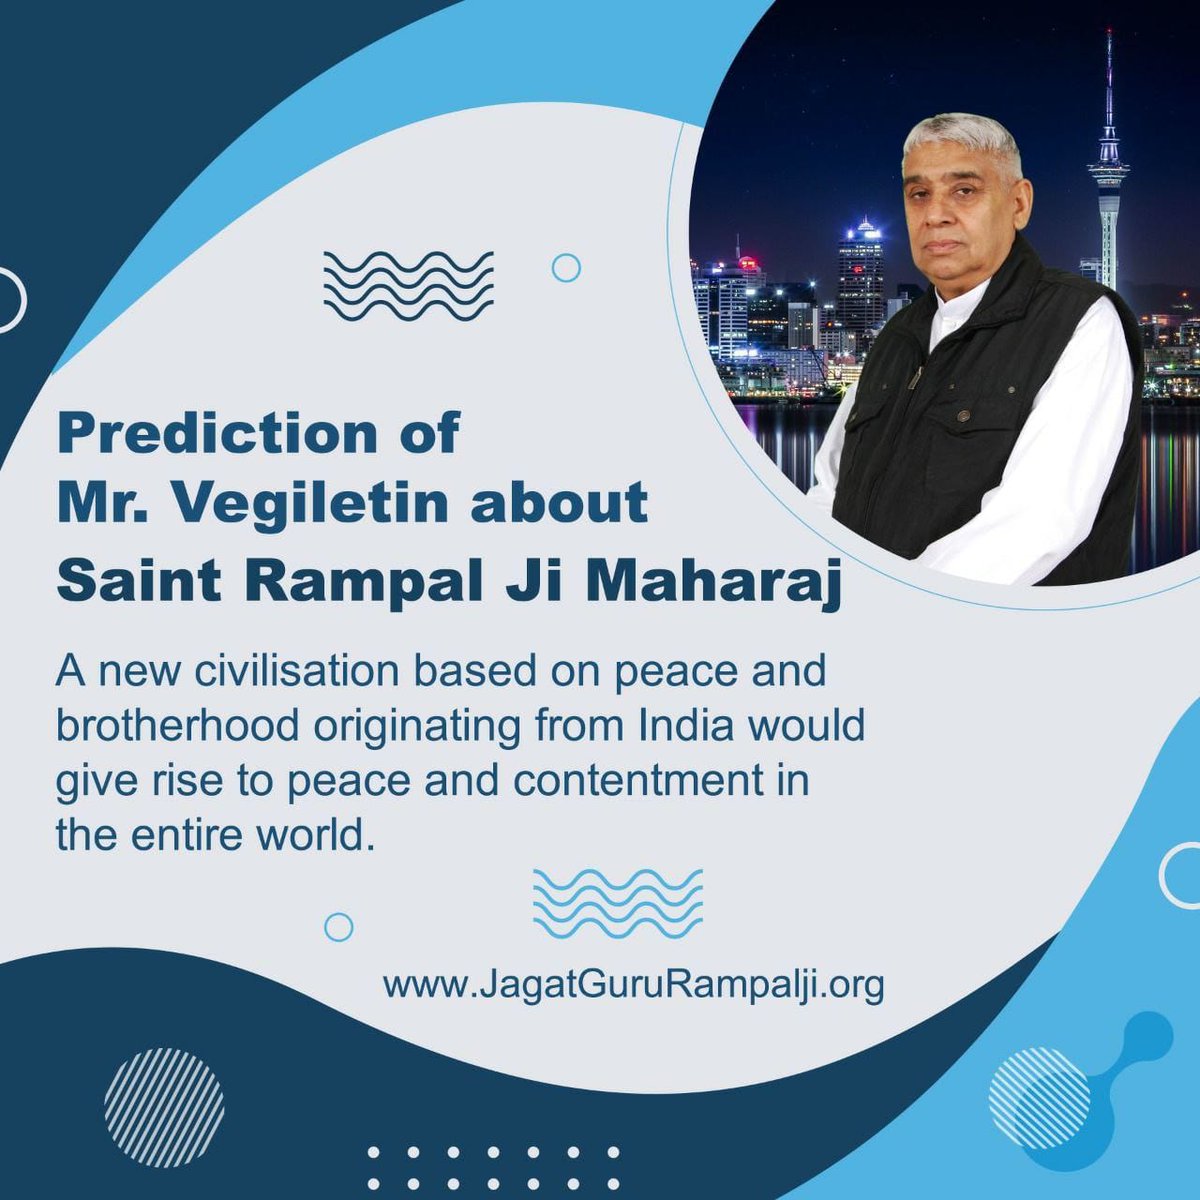 #GodMorningThrusday 

A new civilisation based on peace and brotherhood originating from India would give rise to peace and contentment in the entire world. 
Prediction of Mr. Vegiletin about Saint Rampal Ji Maharaj